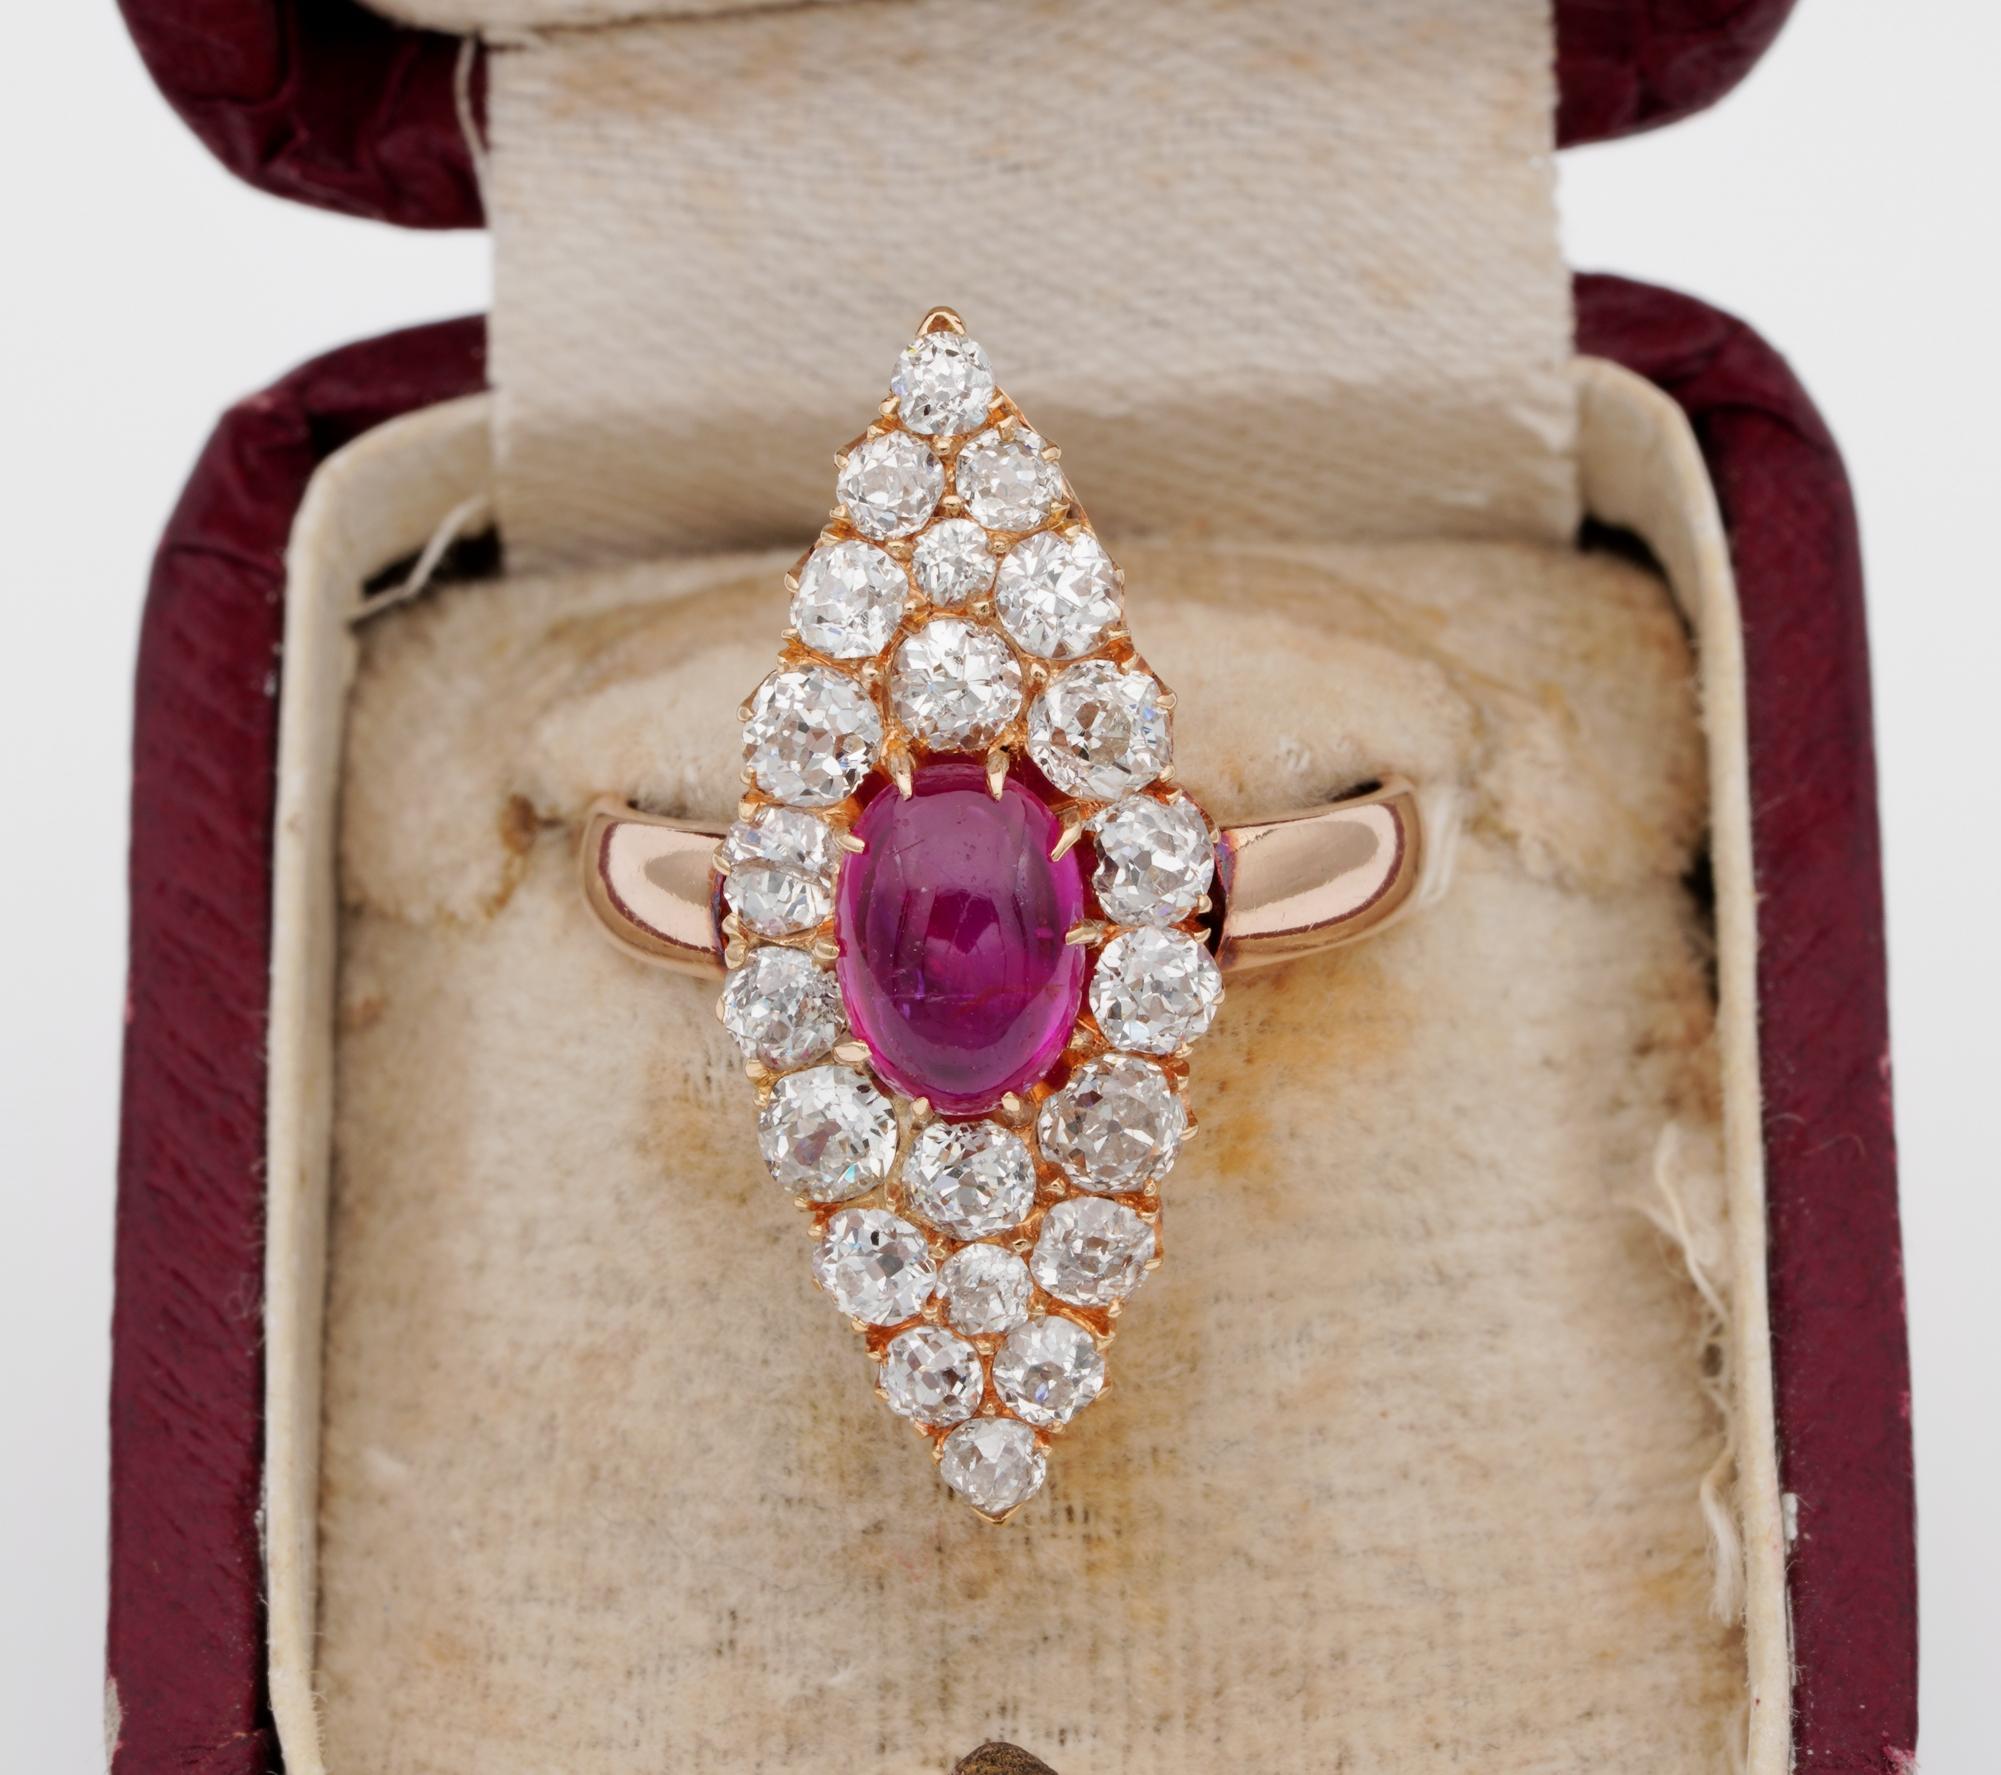 Pure Victorian Elegance!
A distinctive Victorian example which oozes in quality and beauty
Spectacular marquee ring 1880 ca, displaying a stunning Burma ruby raising in opulent Diamond set
Superb, glorious 18 KT rose gold workmanship, not